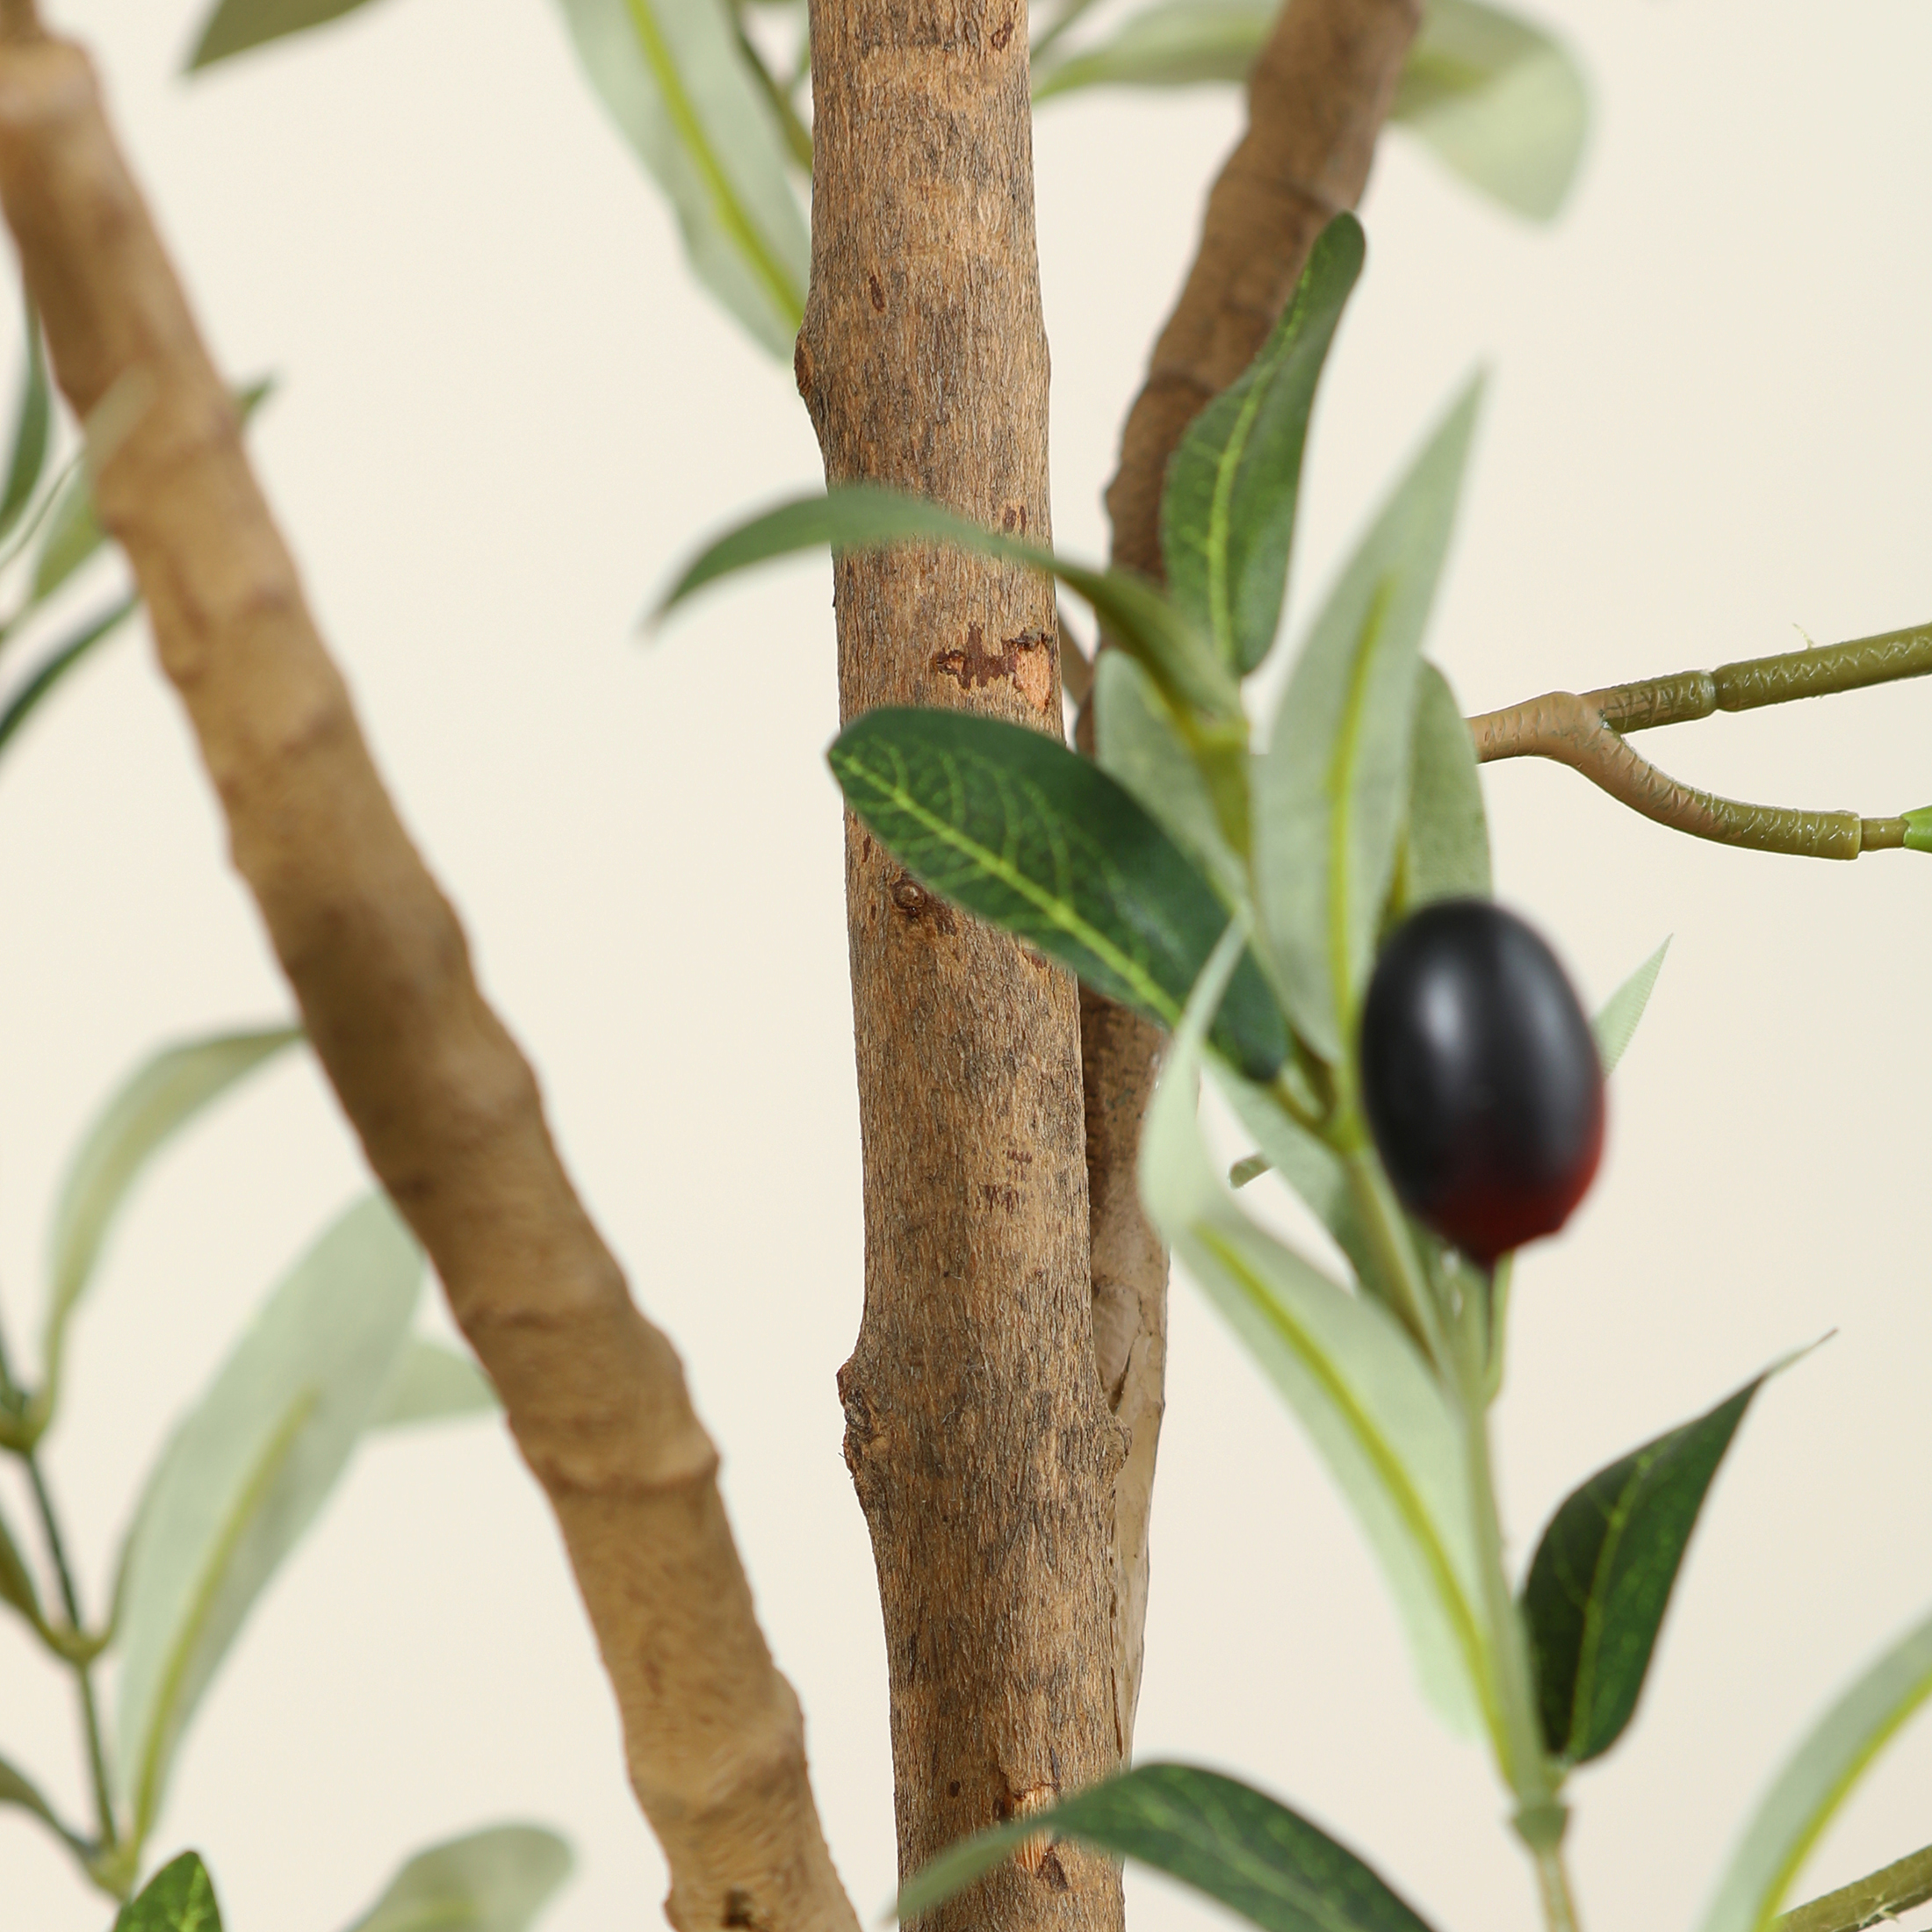 6 ft Artificial Olive Plants with Realistic Leaves and Natural Trunk, Silk Fake Potted Tree with Wood Branches and Fruits, Faux Olive Tree for Office Home Decor - image 3 of 8